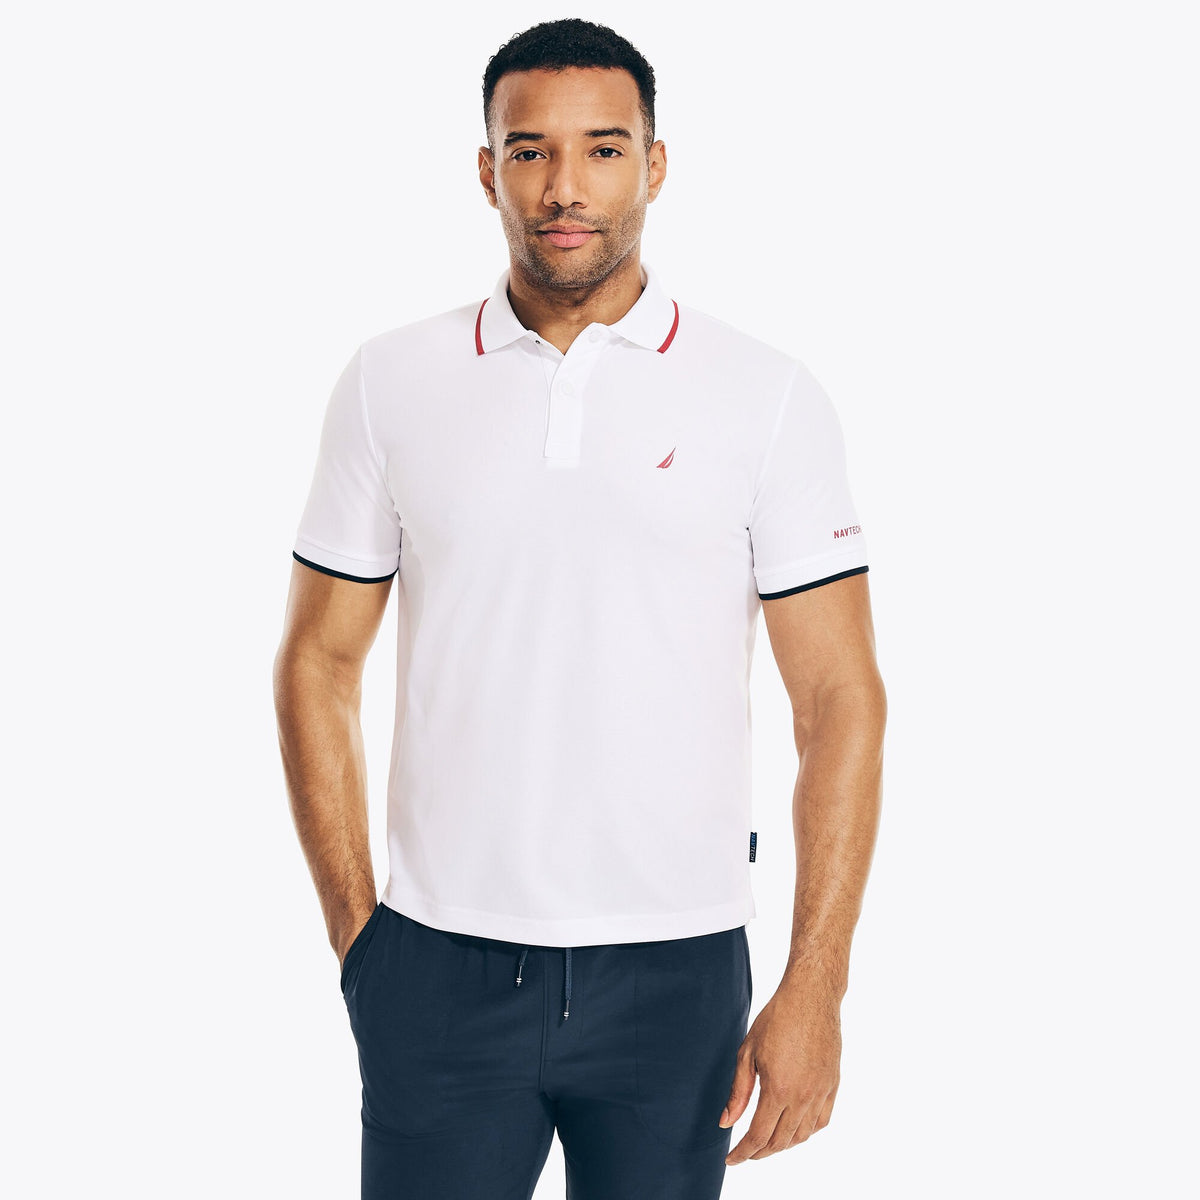 Nautica Men's Big & Tall Navtech Sustainably Crafted Polo Bright White